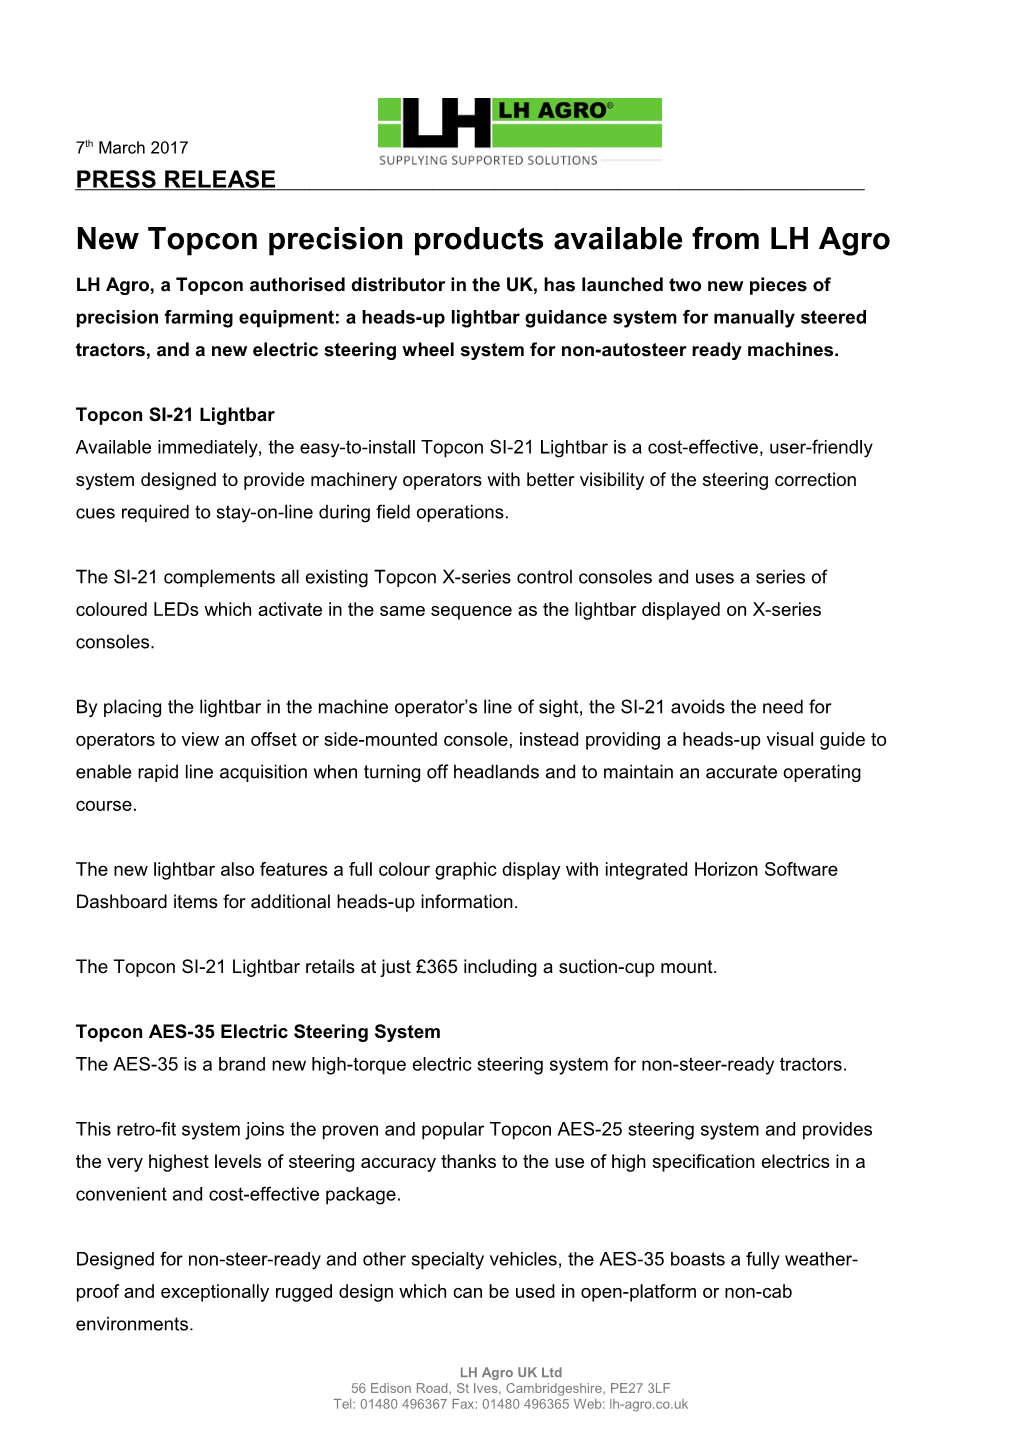 New Topcon Precision Products Available from LH Agro